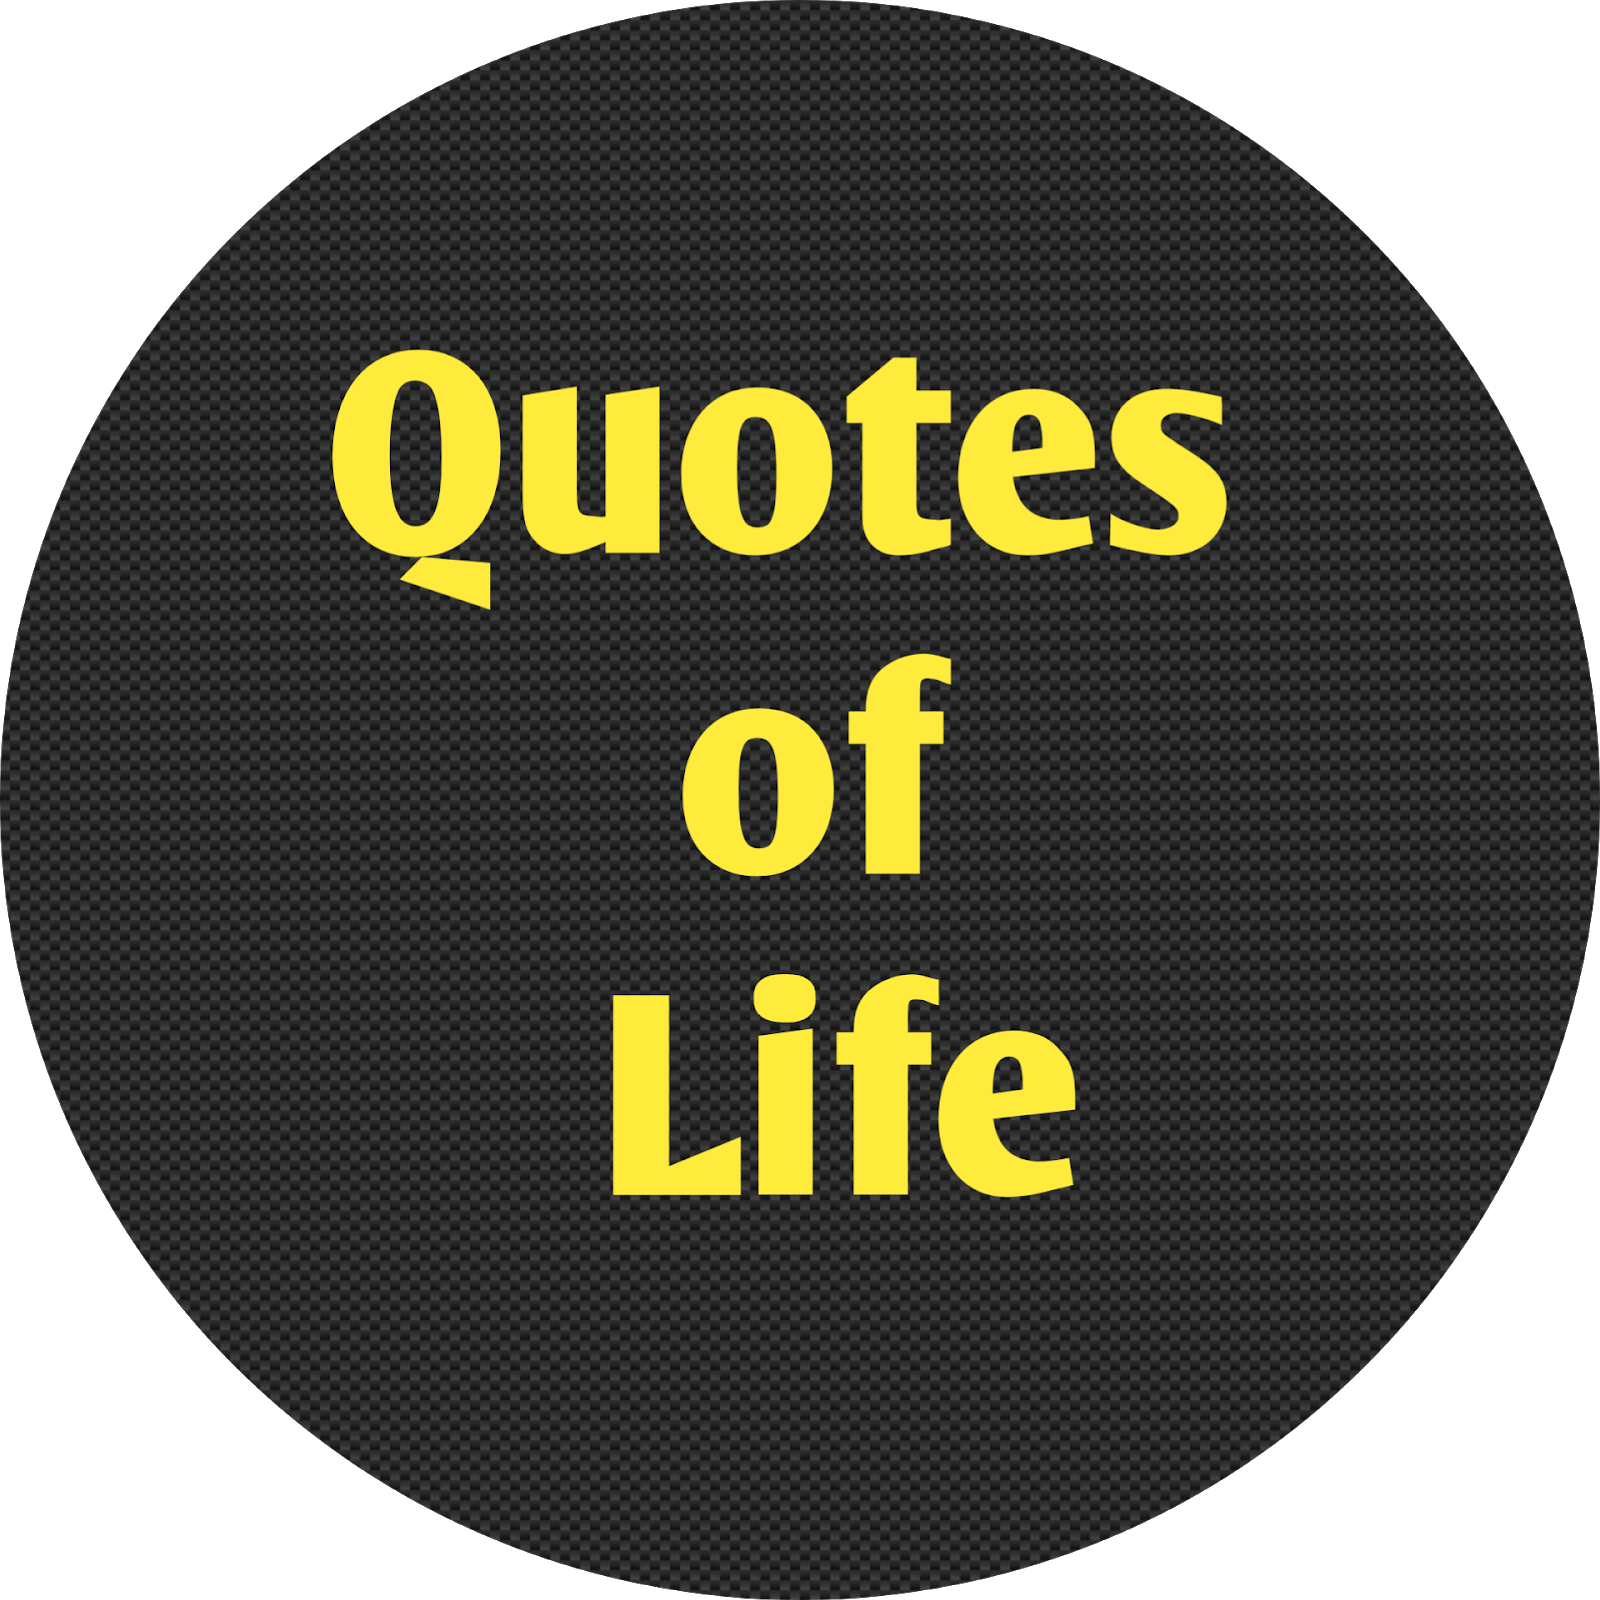 Quotes of Life